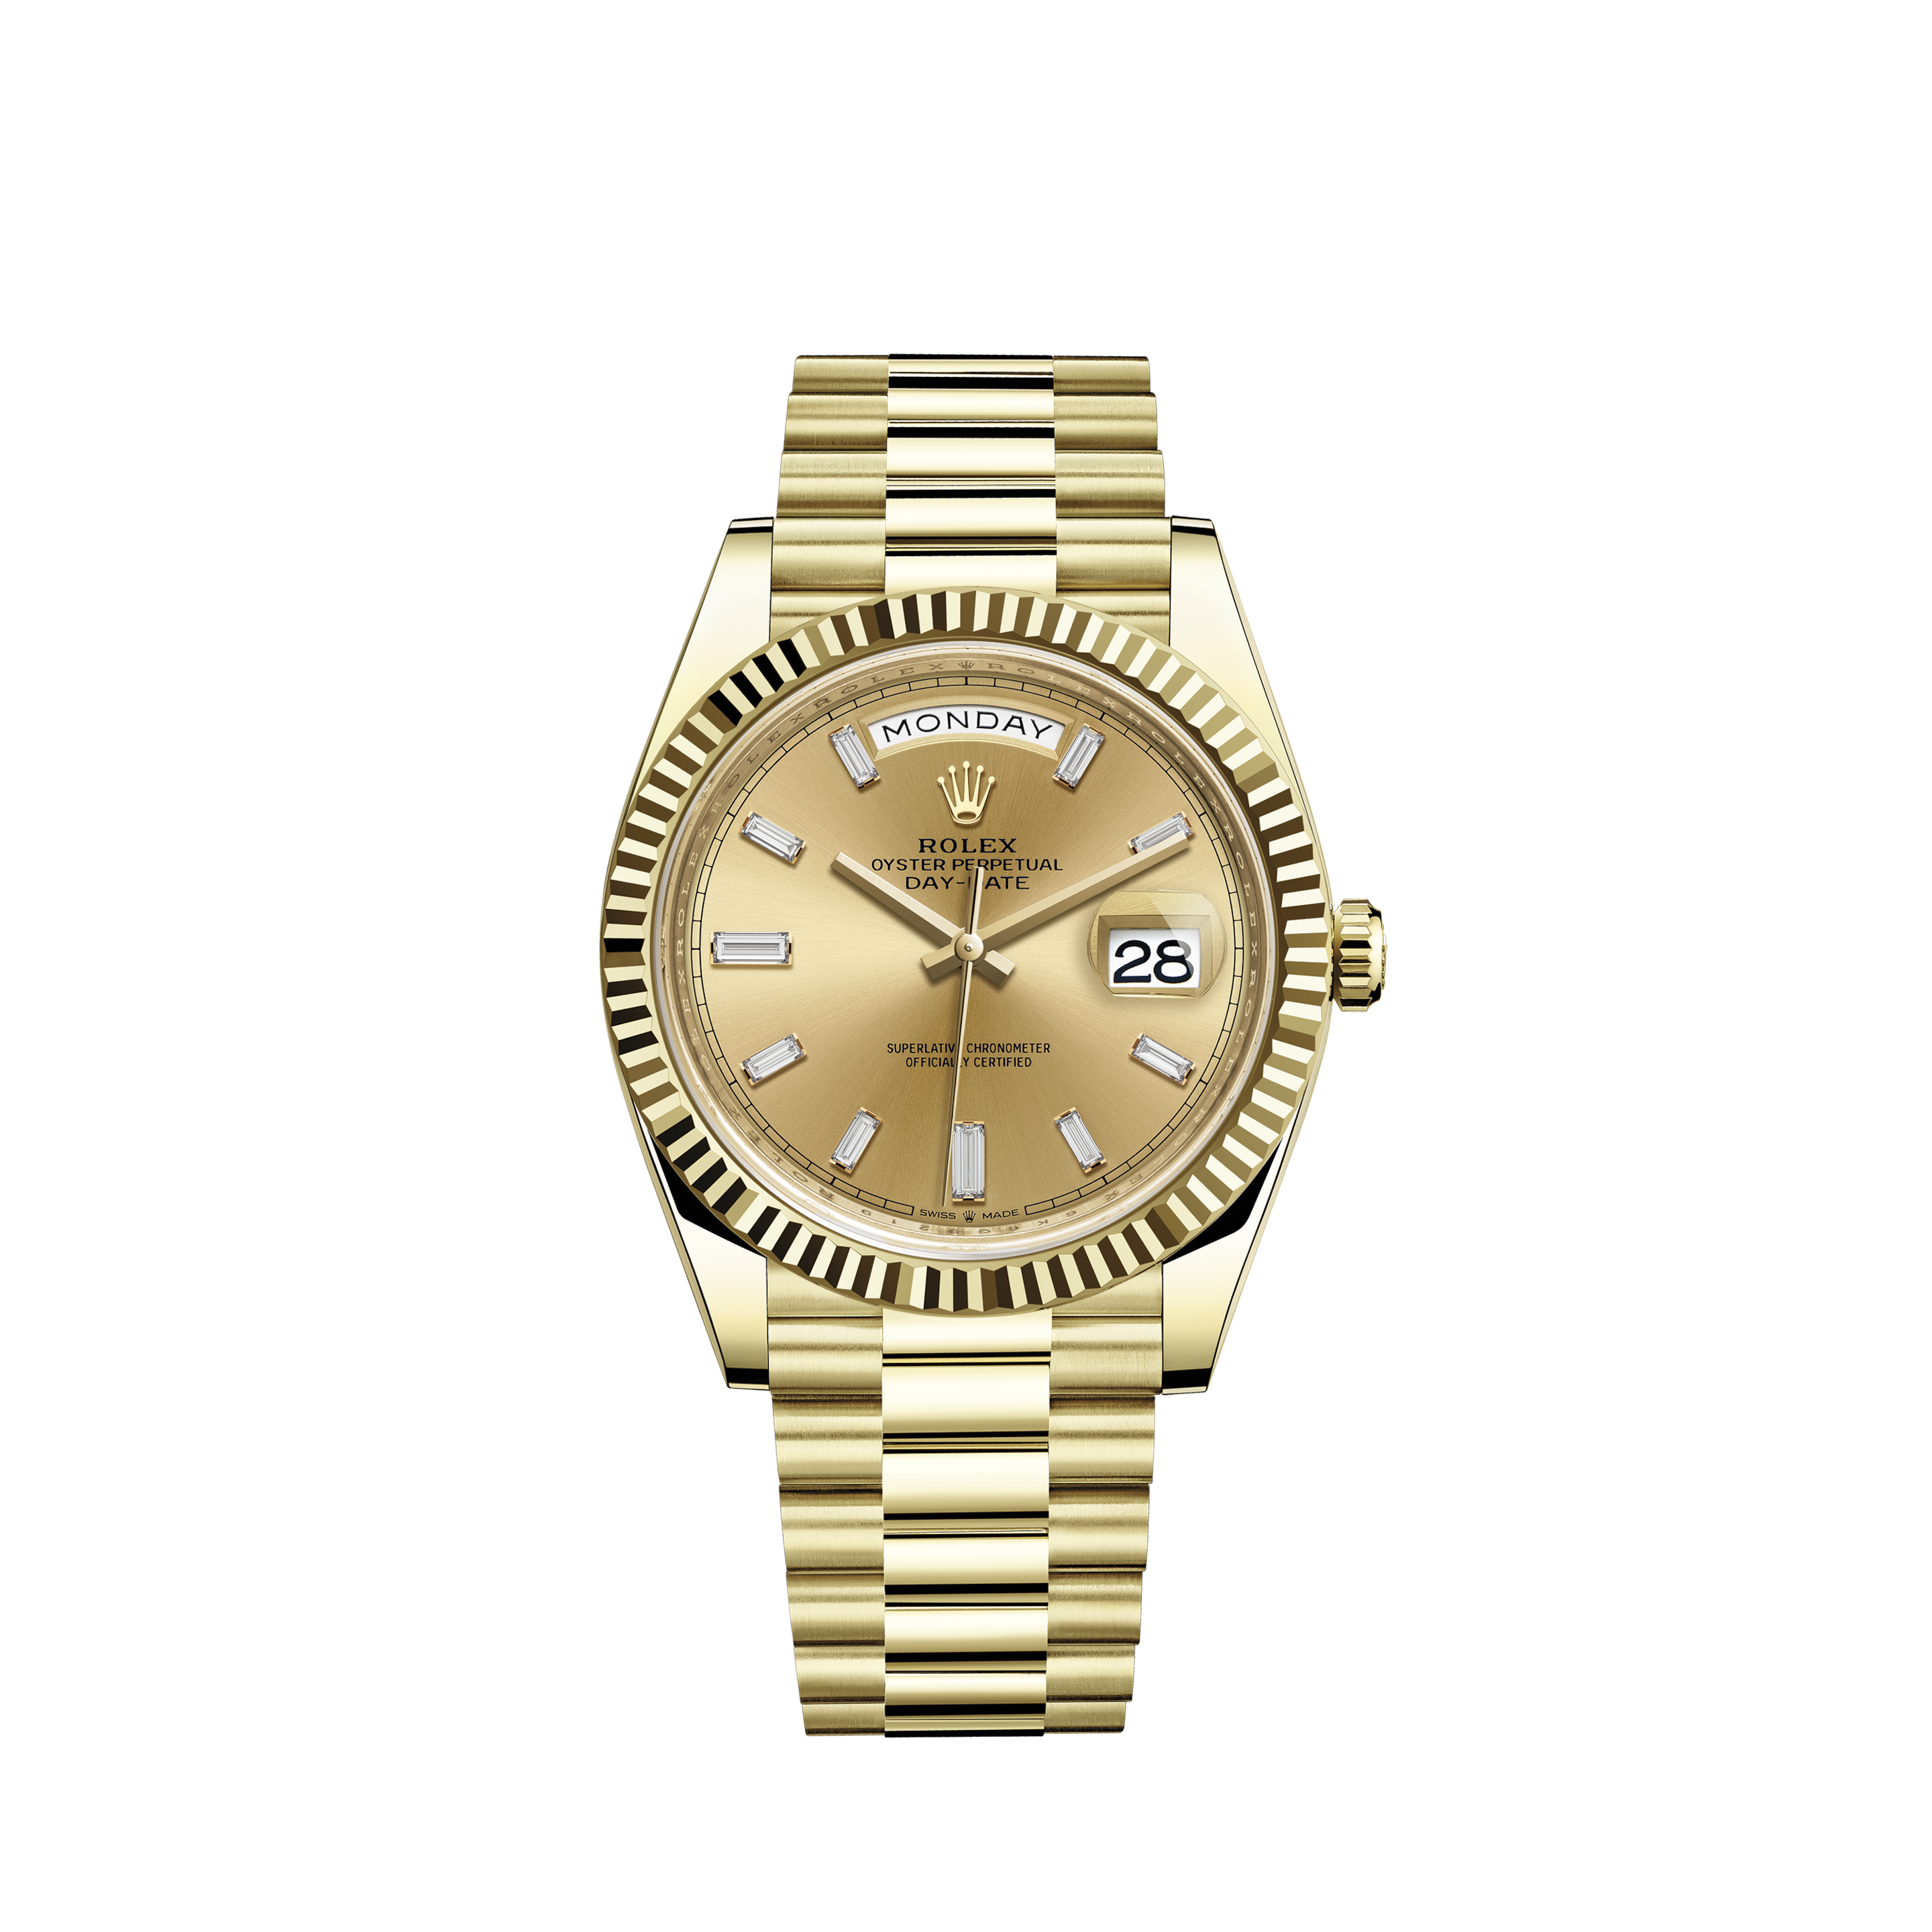 Rolex Oyster Perpetual Datejust Midsize 6824